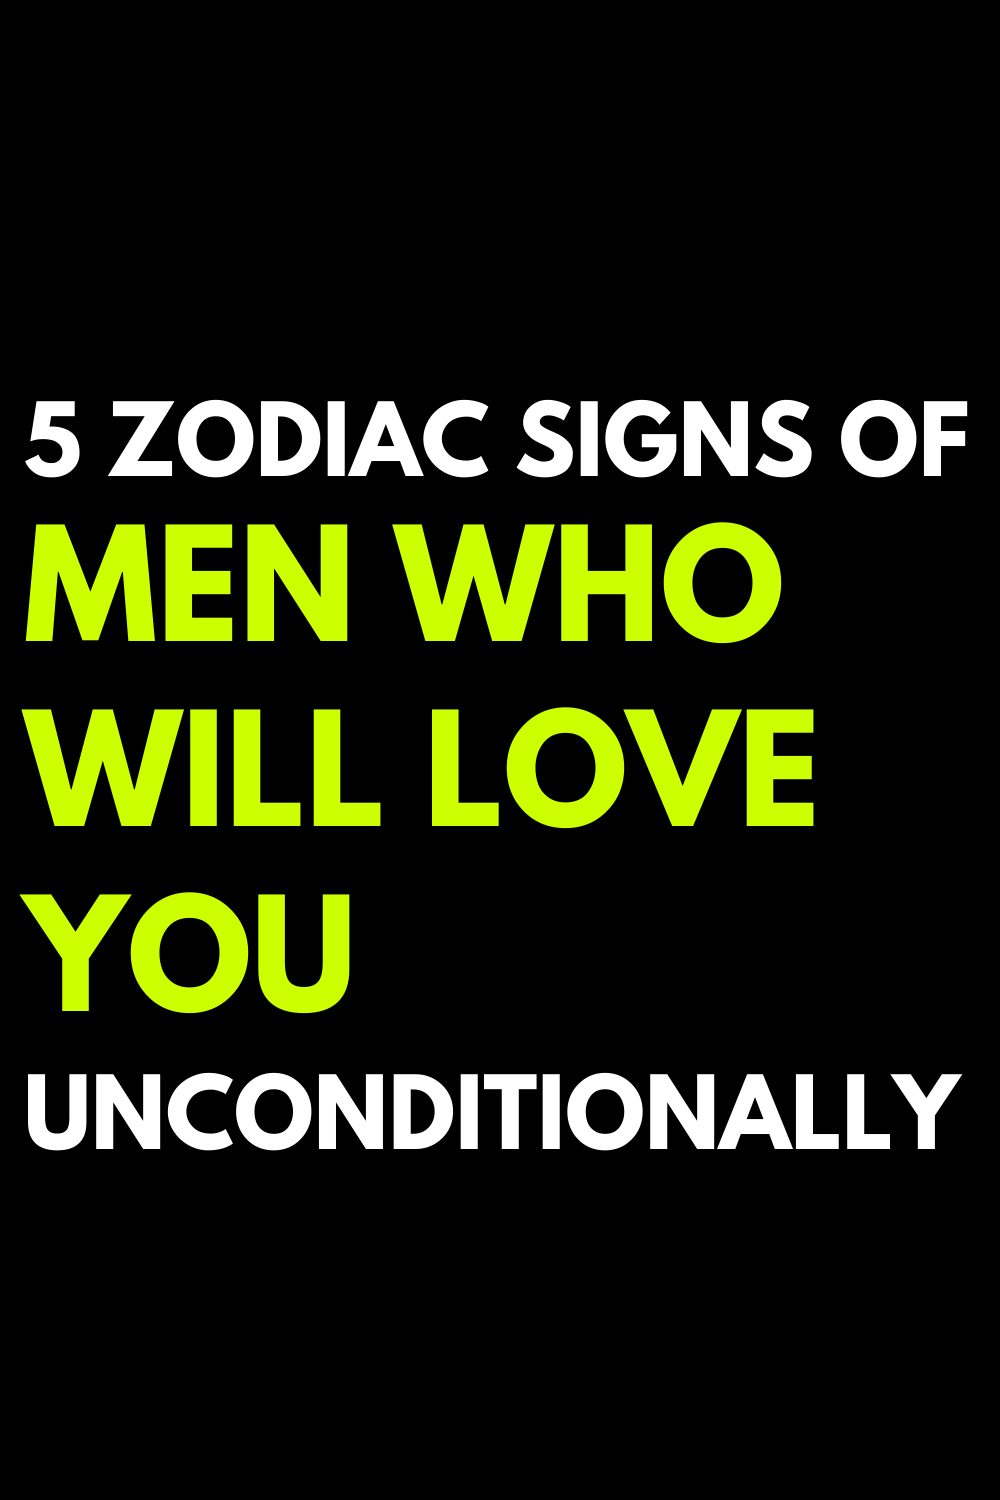 5 zodiac signs of men who will love you unconditionally